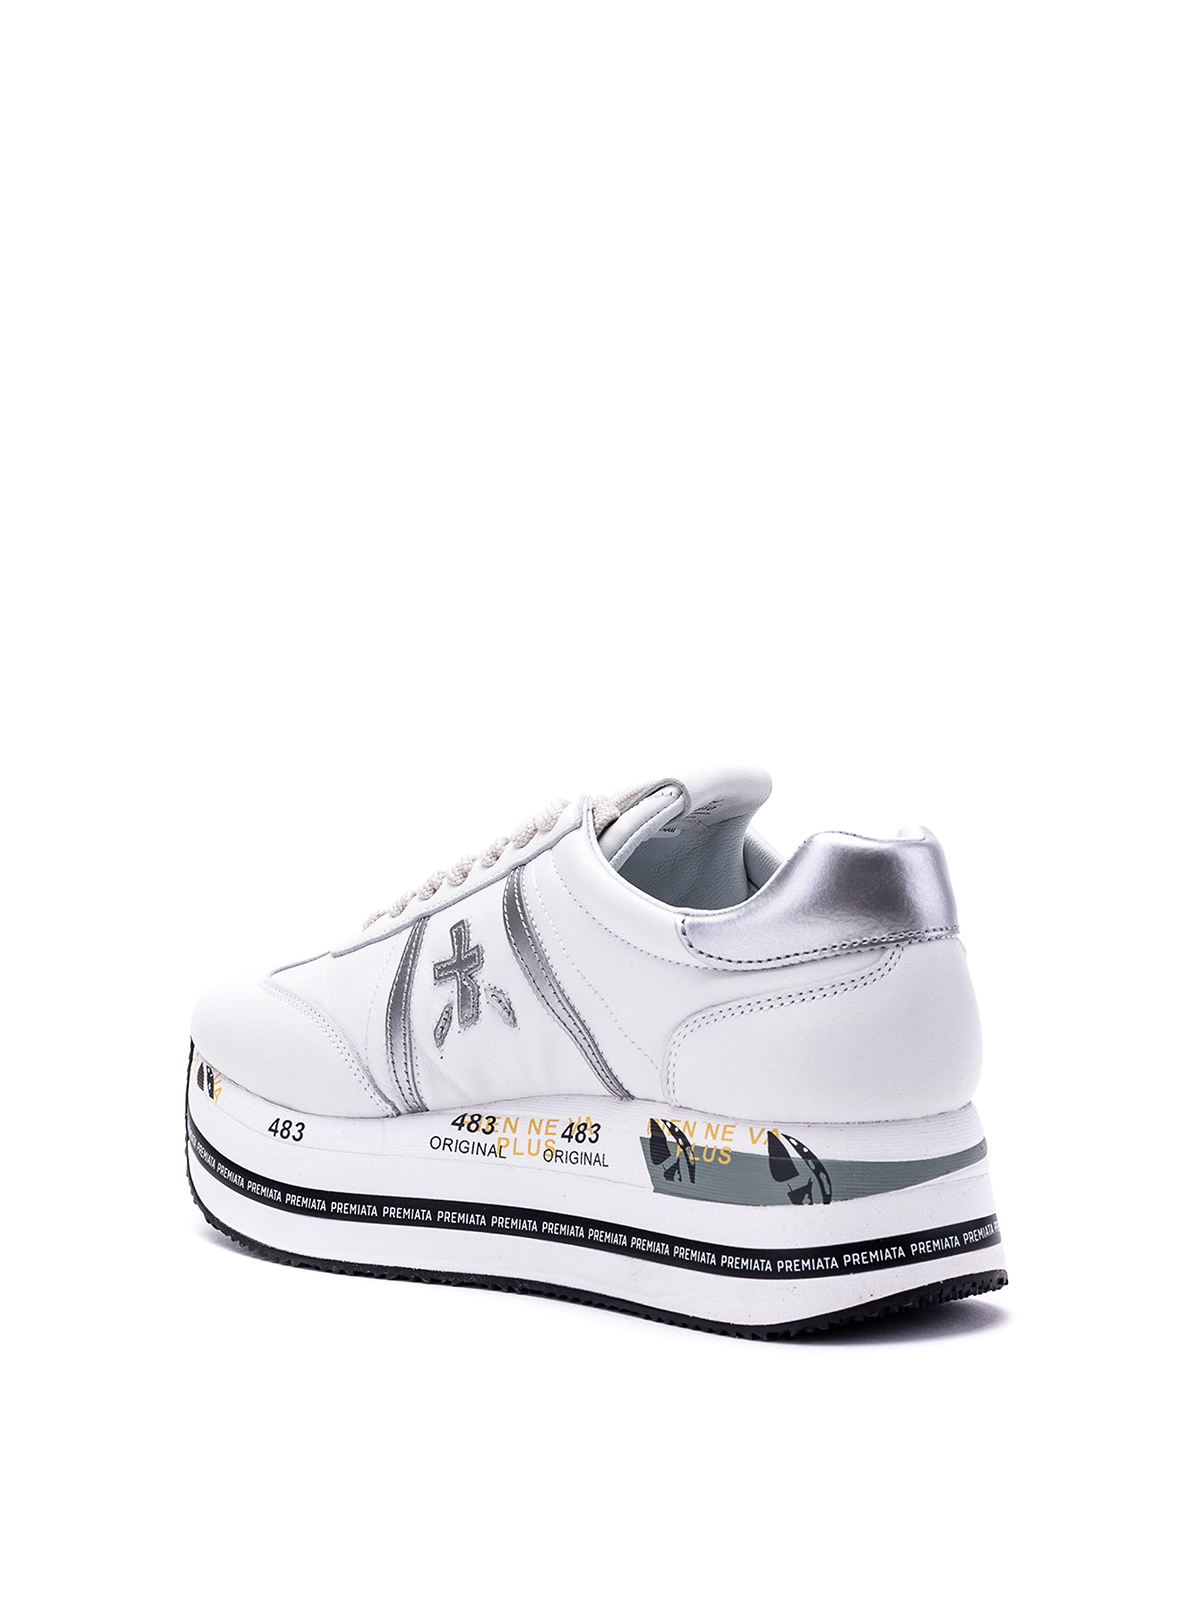 Premiata - Beth sneakers - trainers - BETH4840 | Shop online at iKRIX